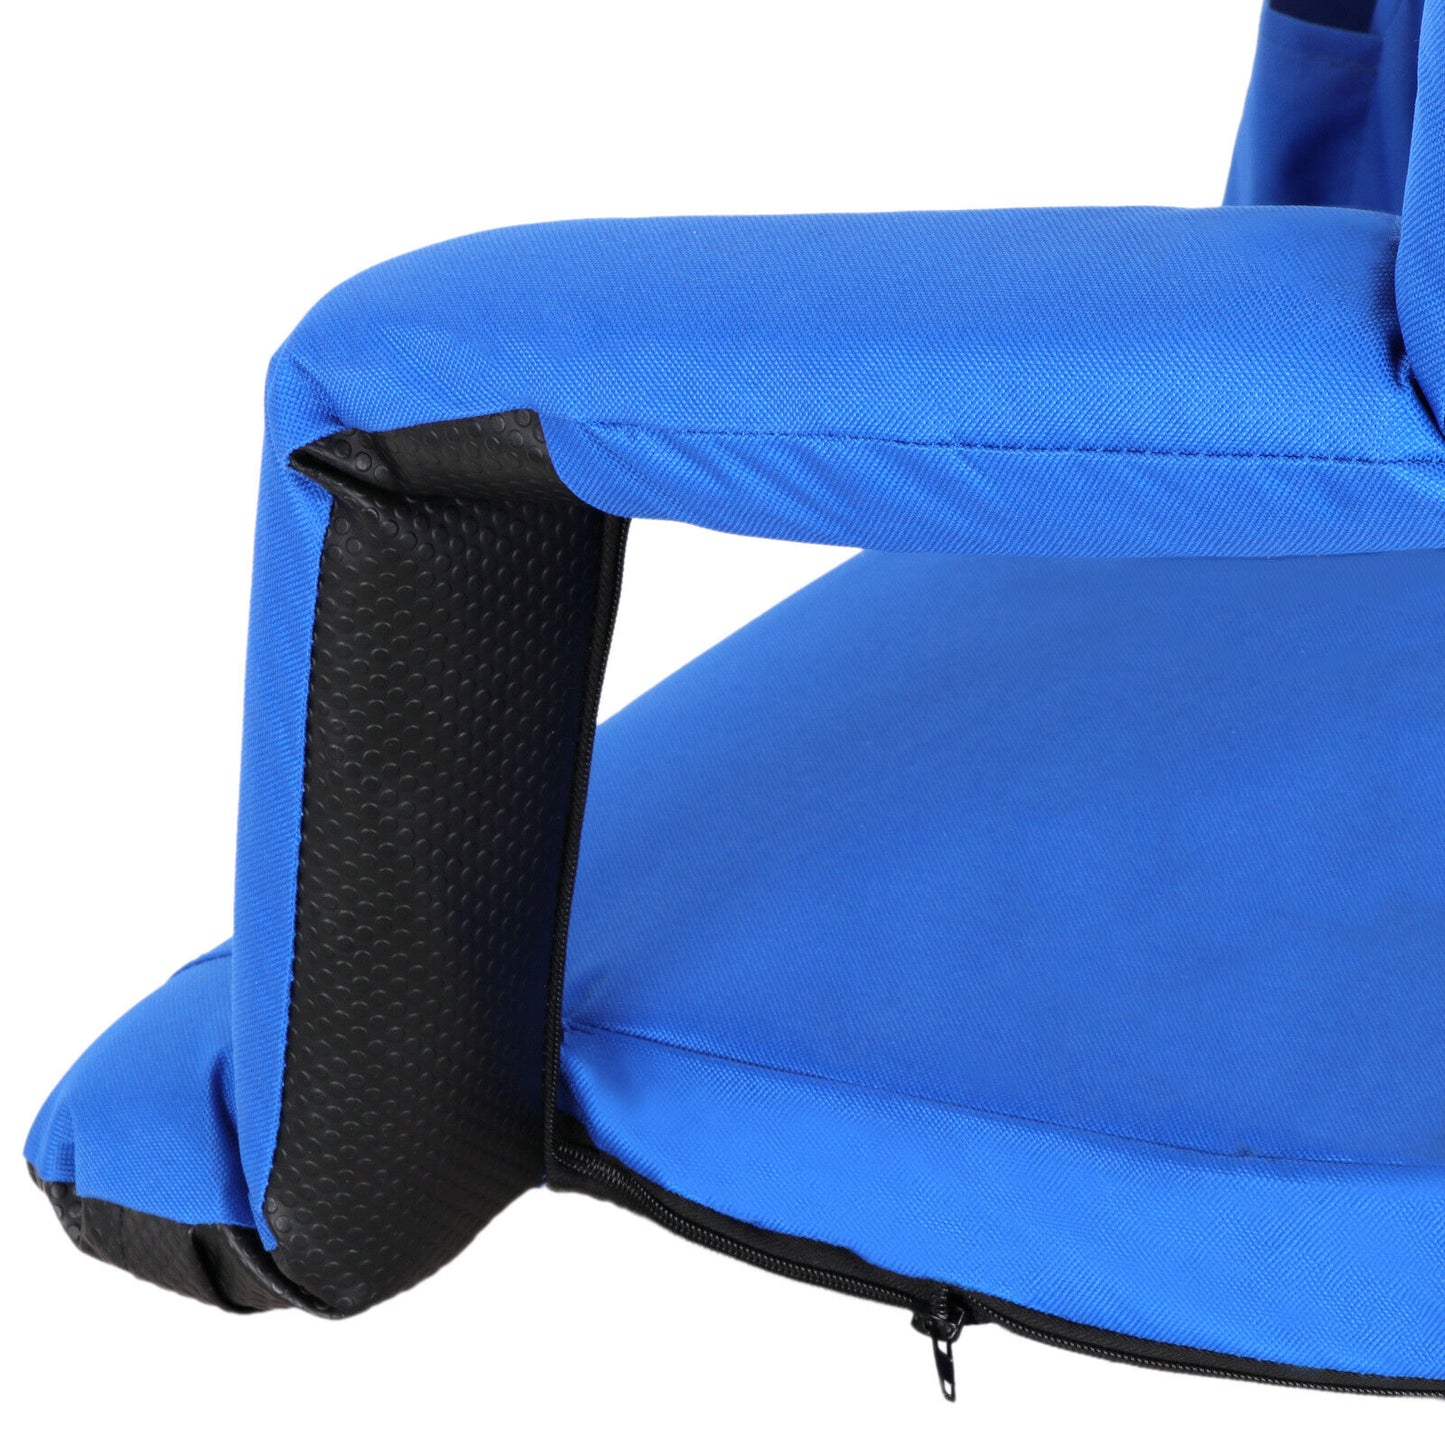 Portable 2 Pieces Stadium Seat Chairs Gym Reclining 5 Adjustable Positions Blue